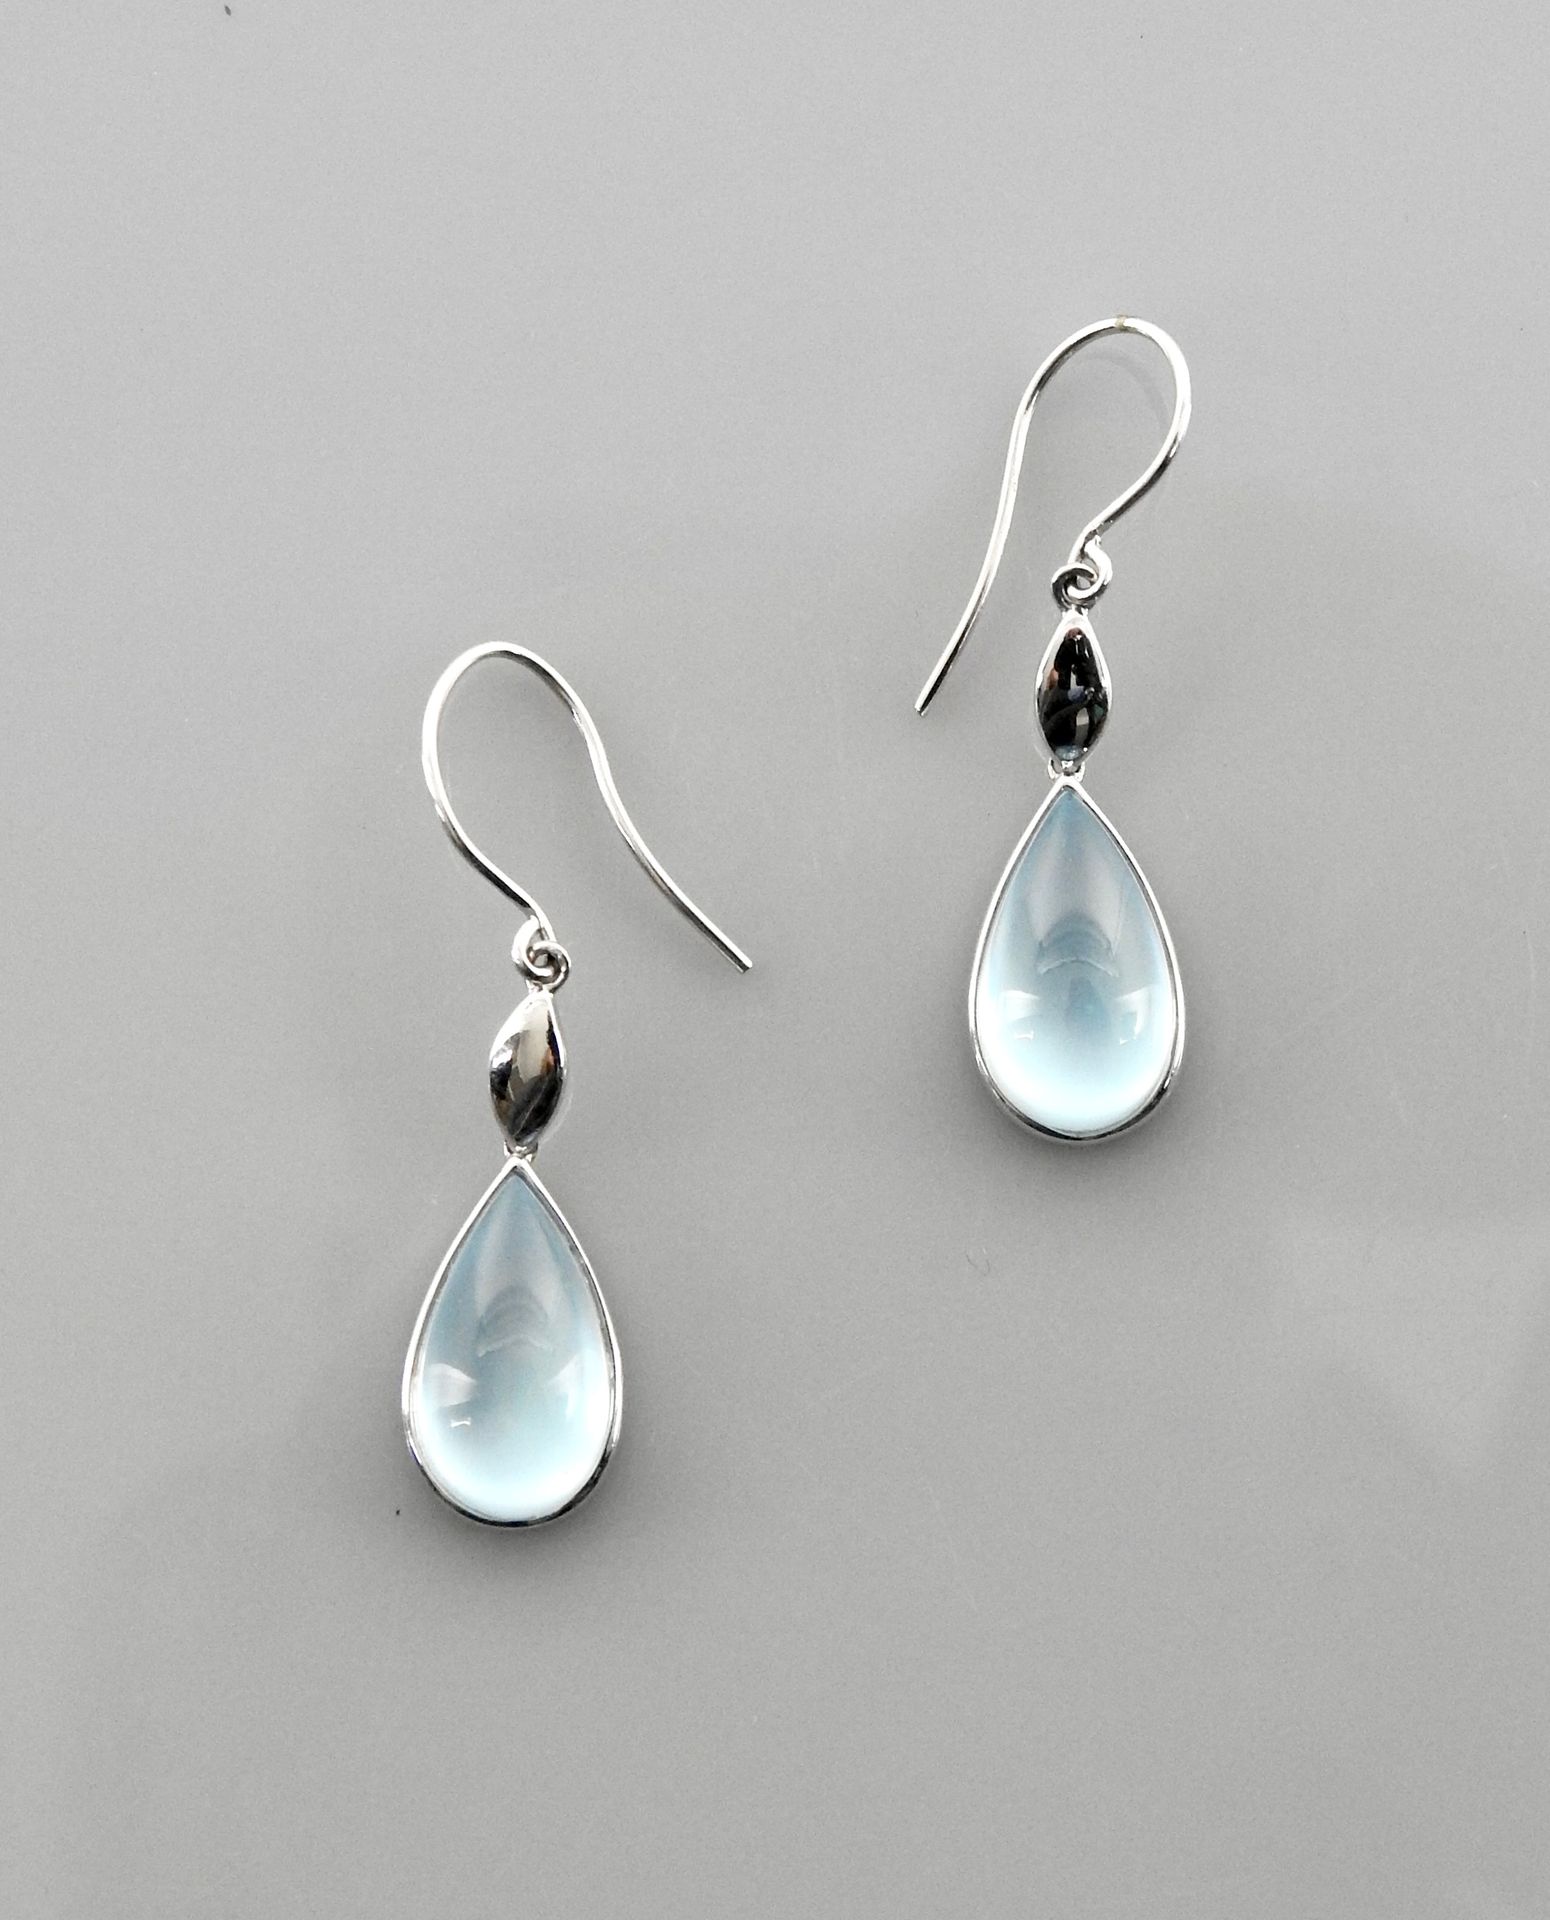 Null Earrings in white gold, 750 MM, each decorated with a blue topaz cabochon, &hellip;